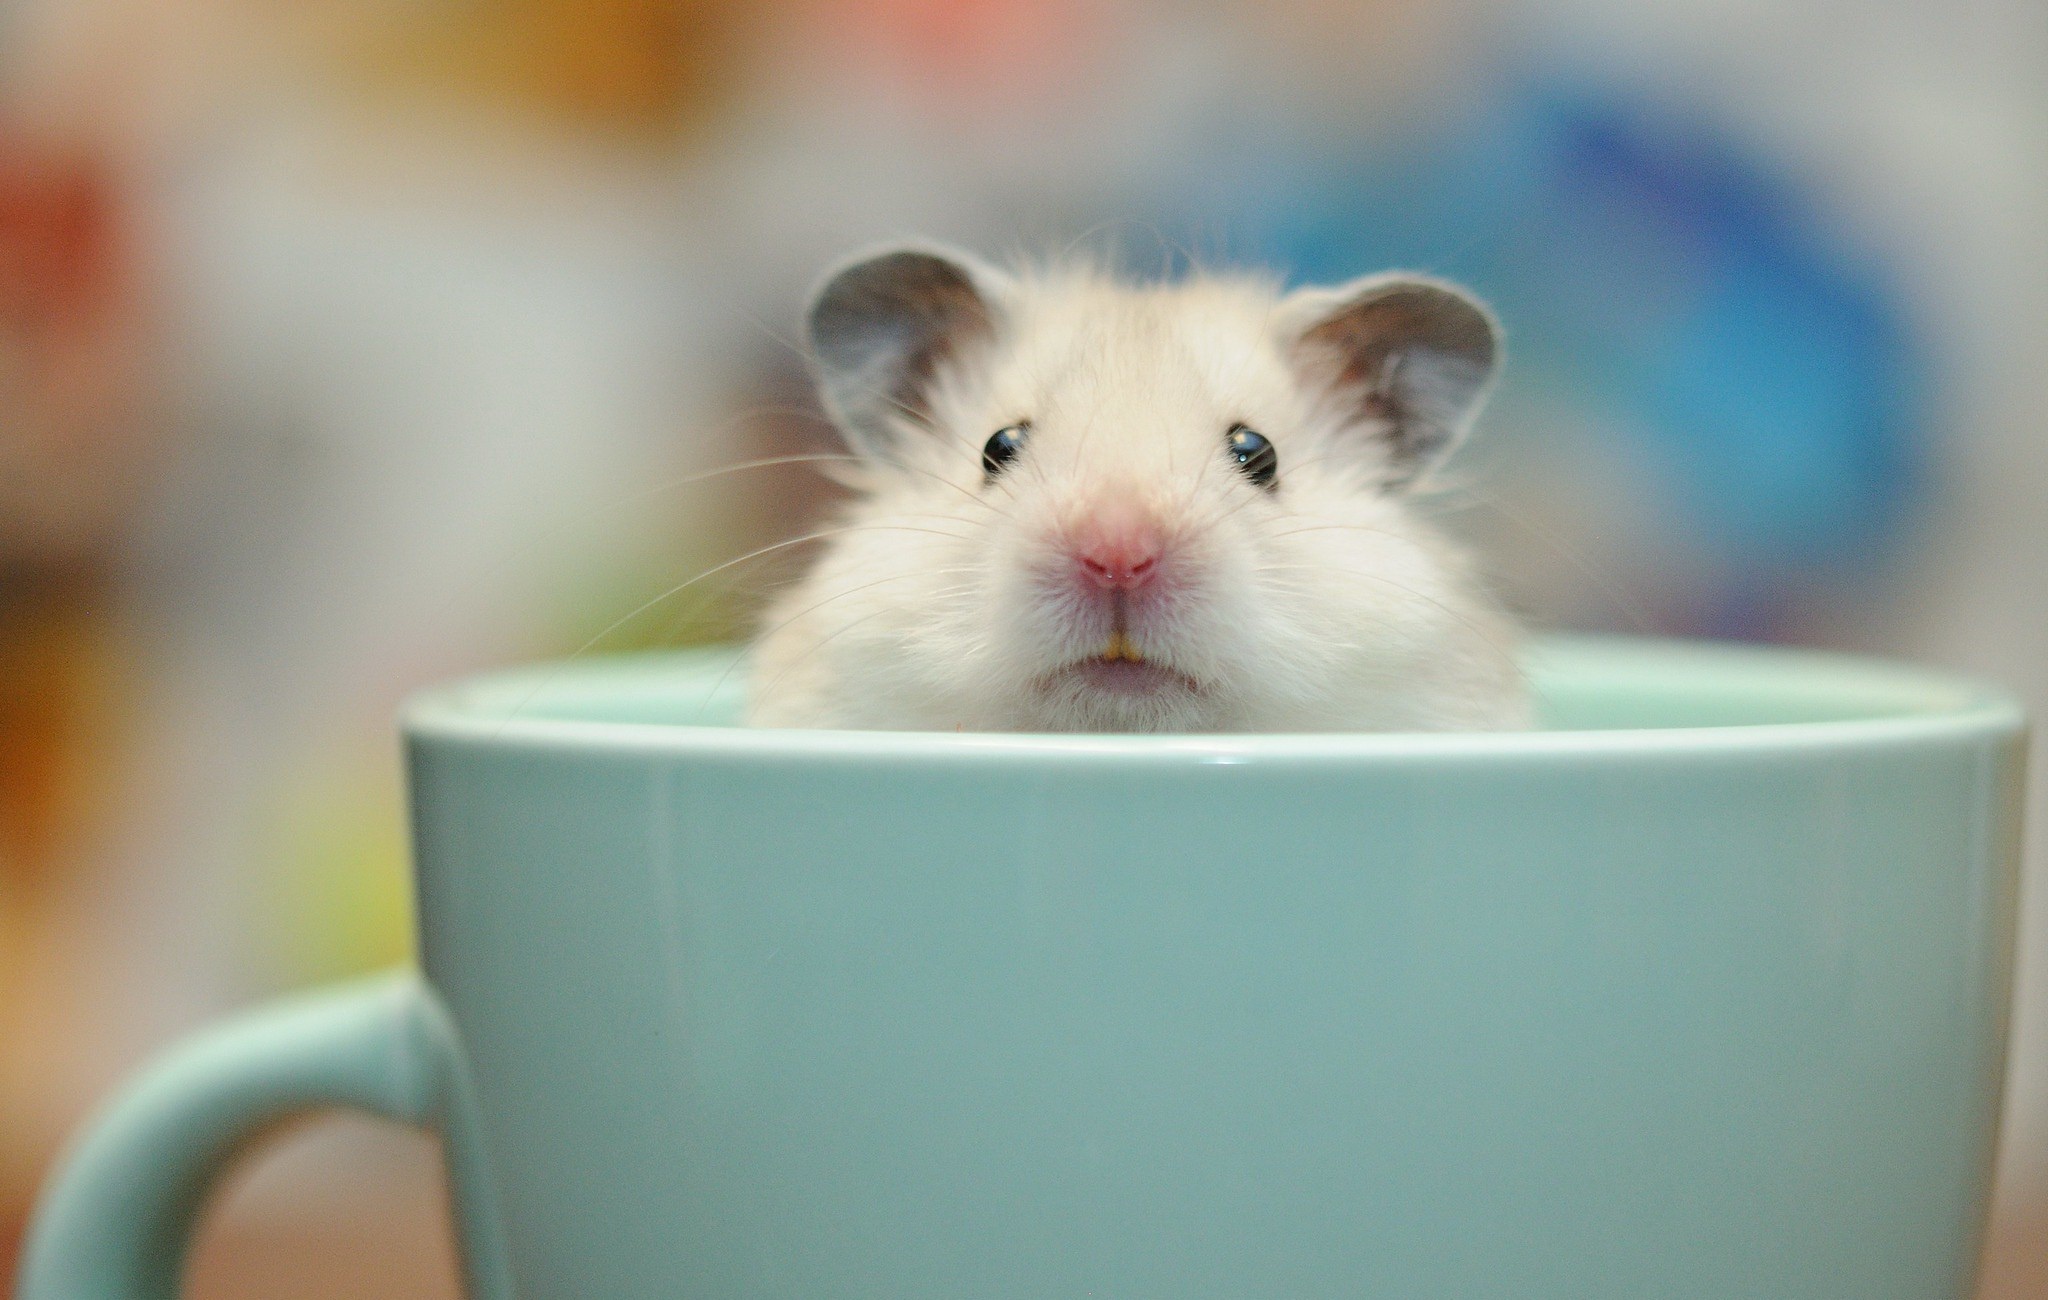 HD hamster wallpapers, Adorable and furry, Curious little creatures, Cute hamster moments, 2050x1300 HD Desktop